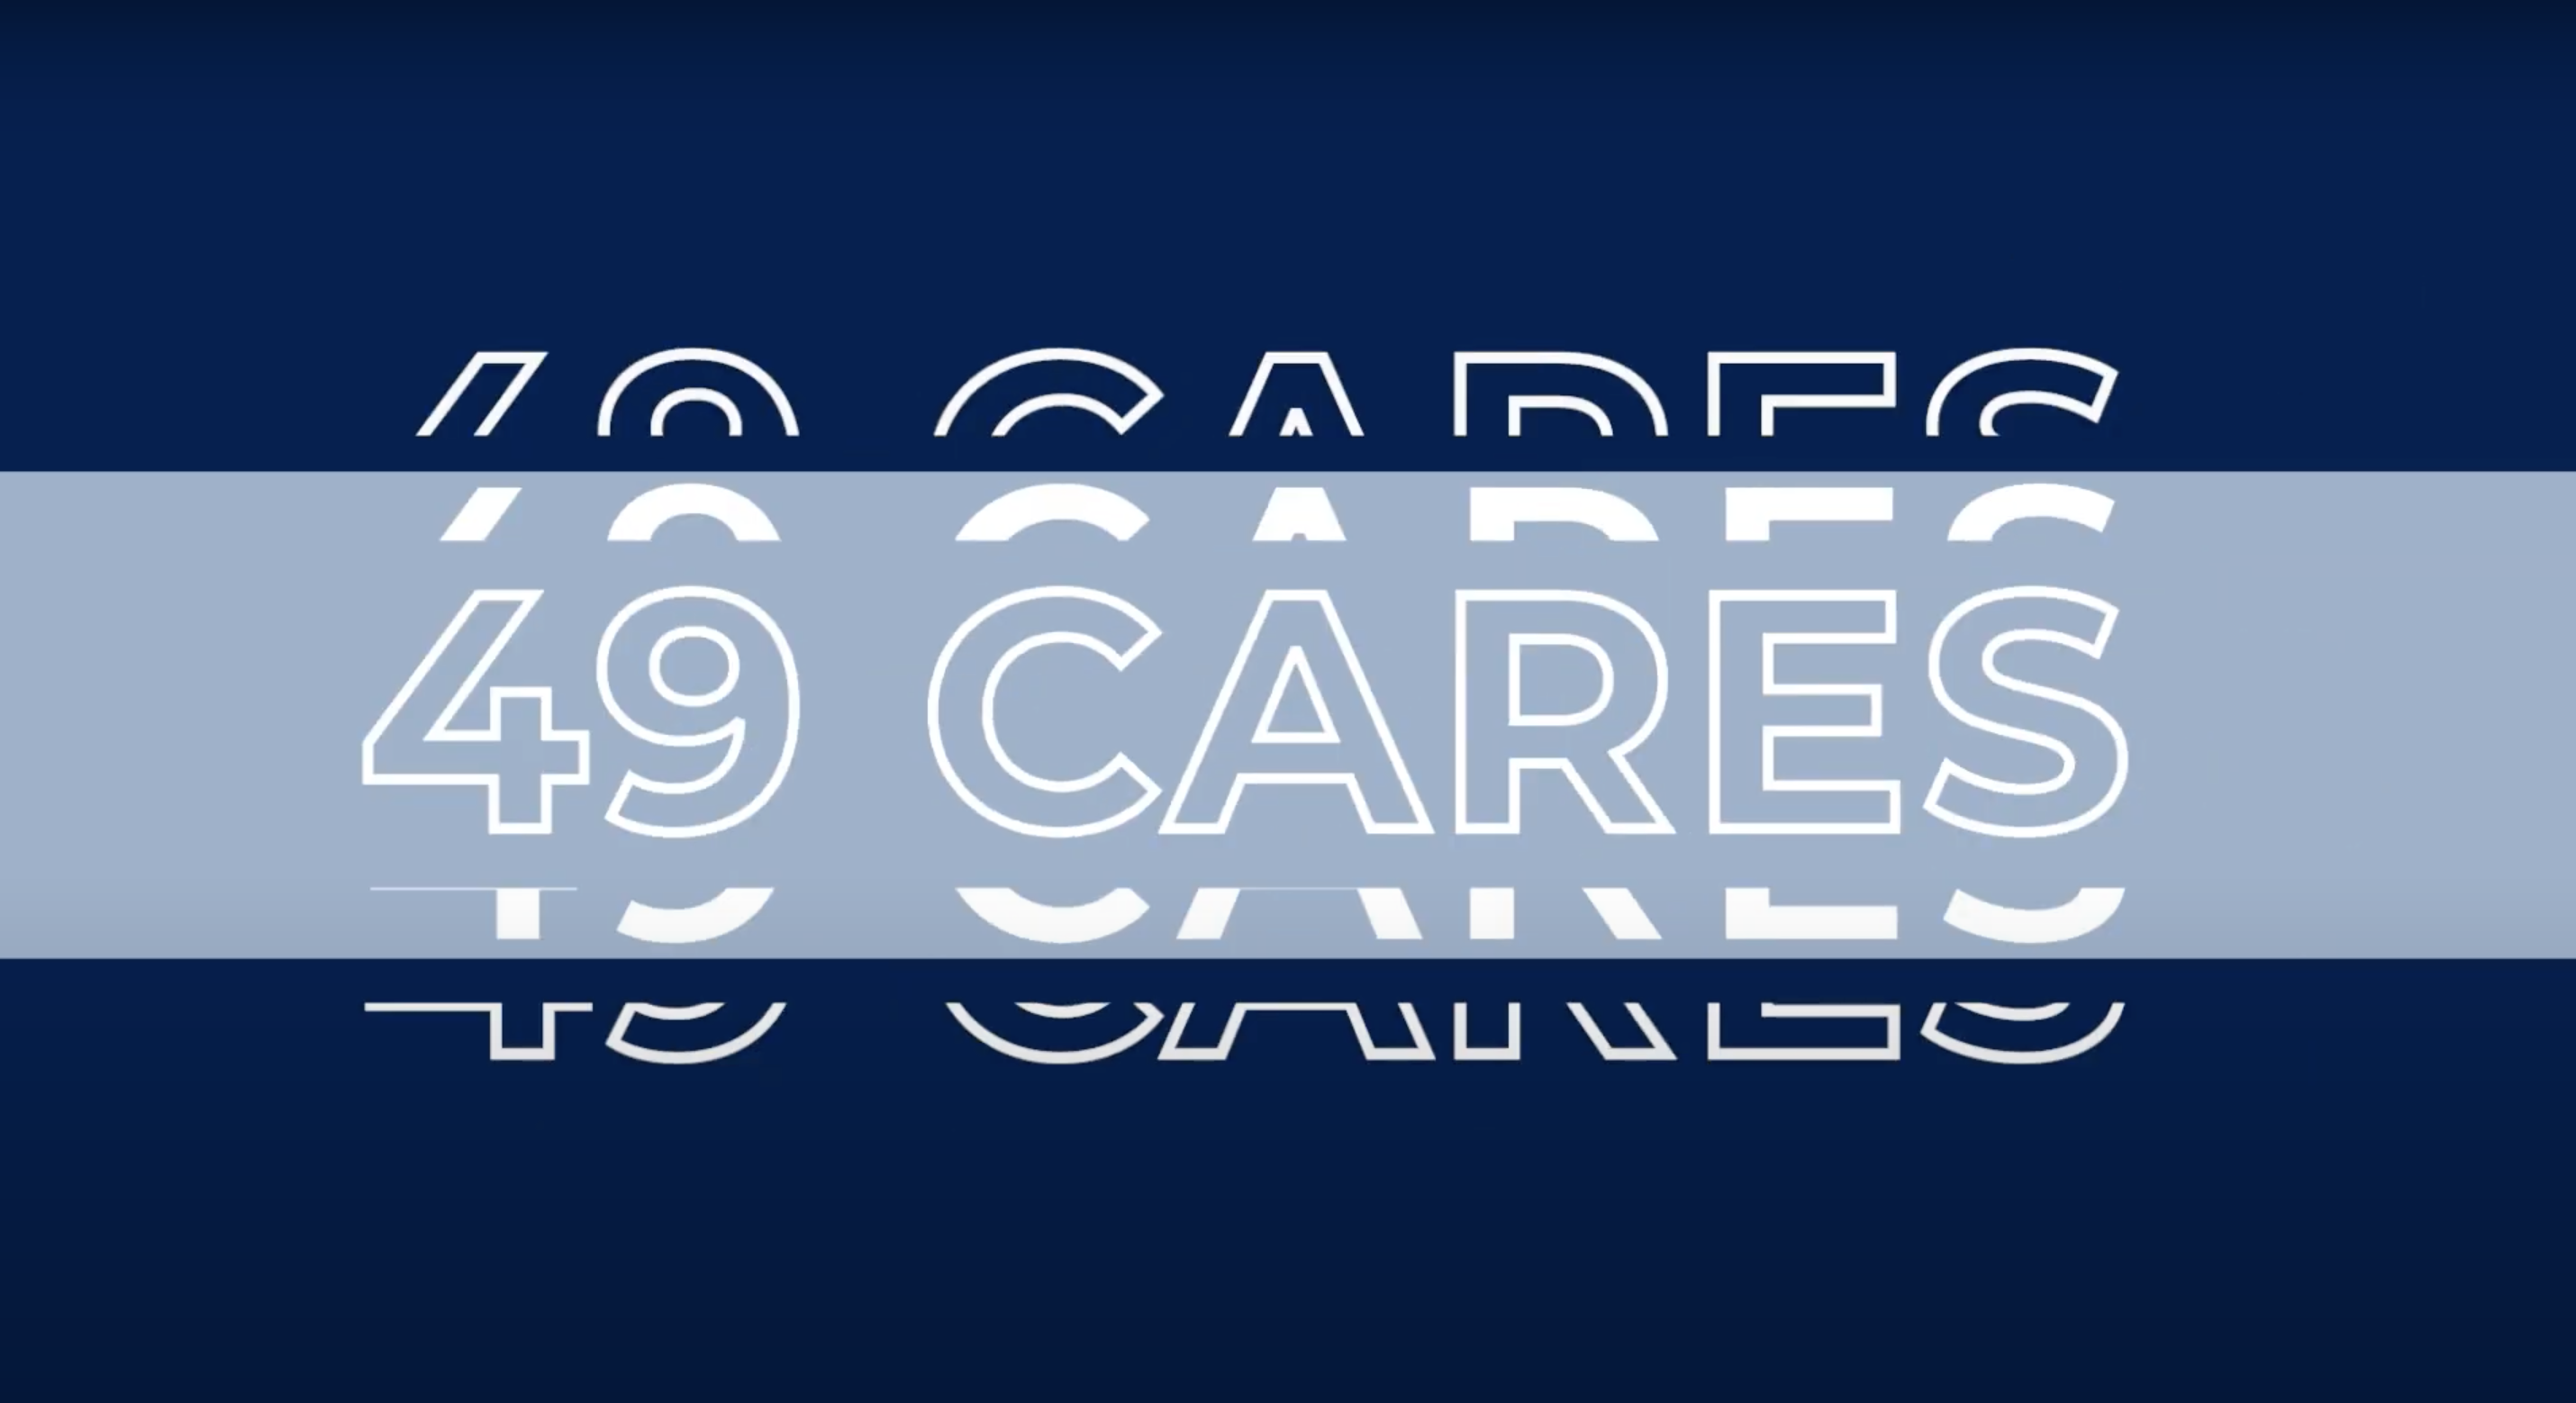 What is 49 Cares?